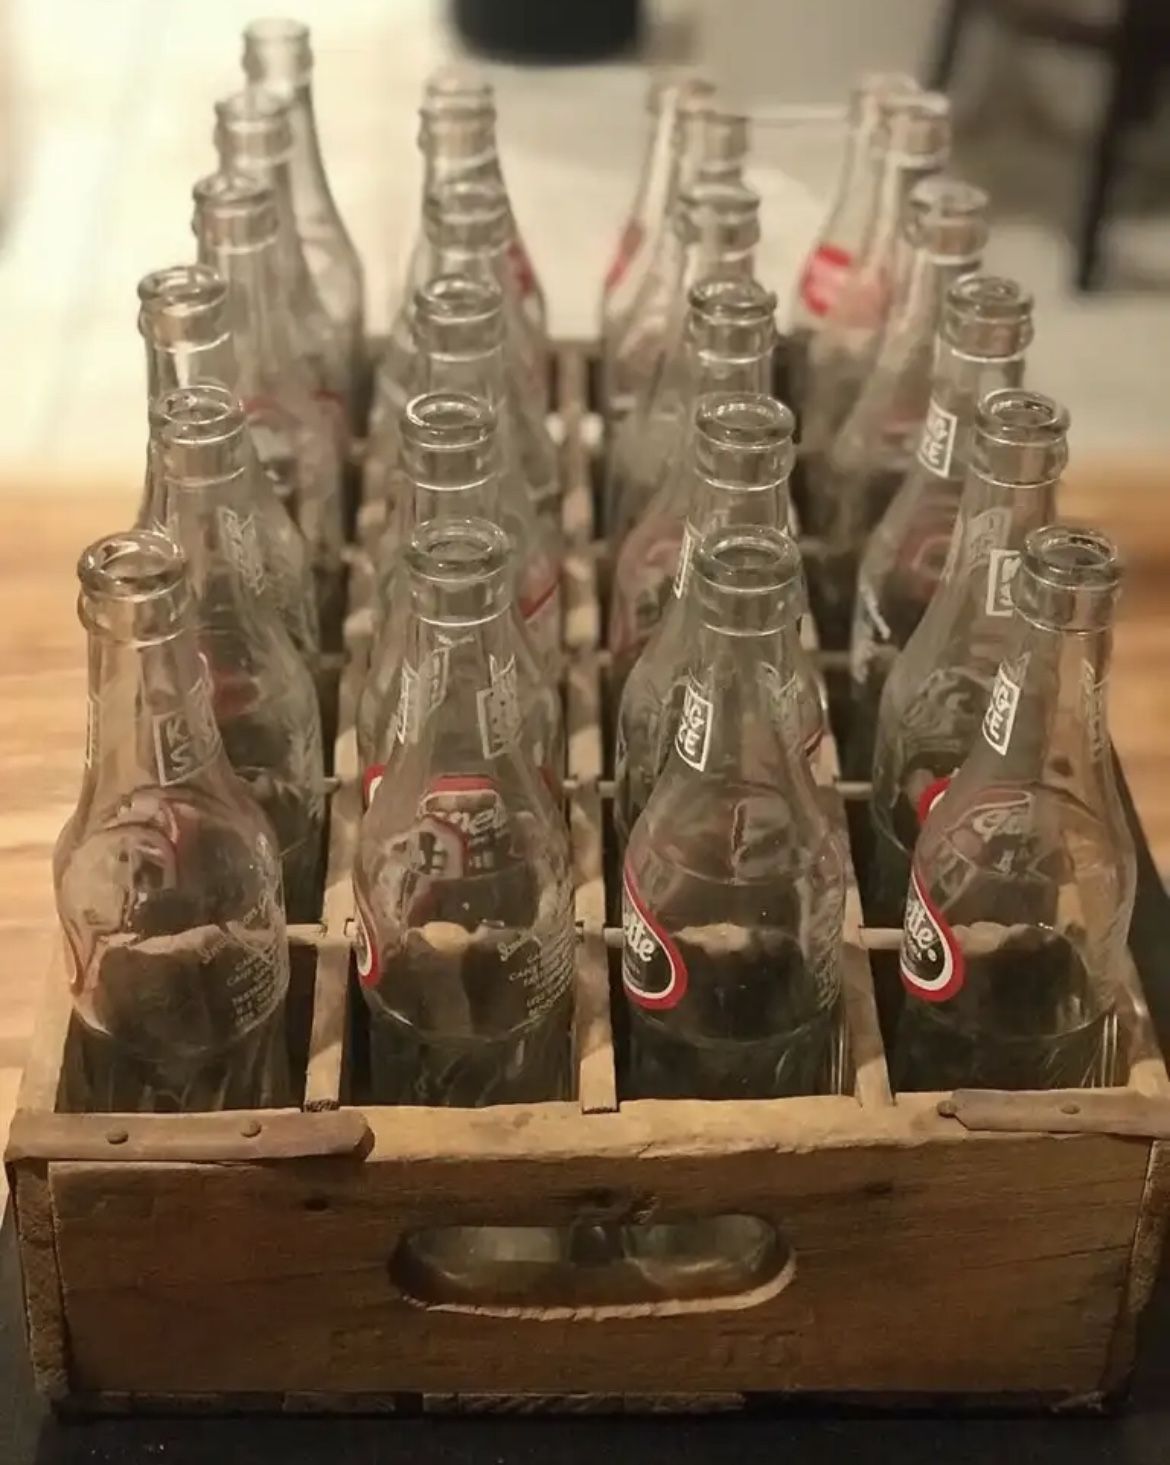 Vintage Grapette & Double Cola bottled with wood crate